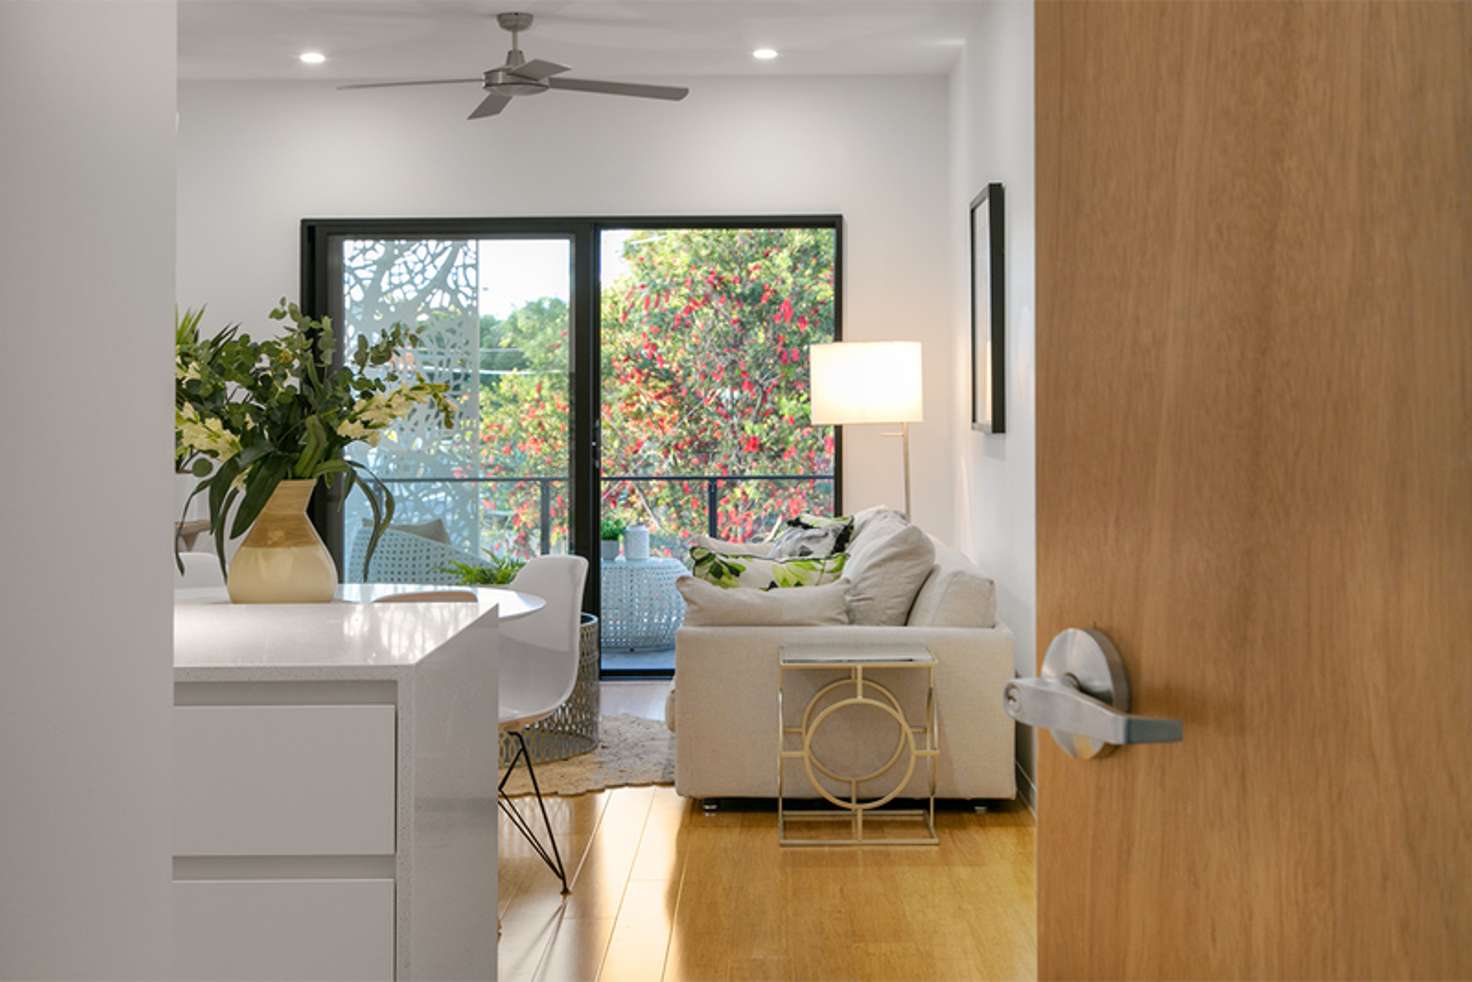 Main view of Homely apartment listing, 8/1 Livingstone St, Yeerongpilly QLD 4105